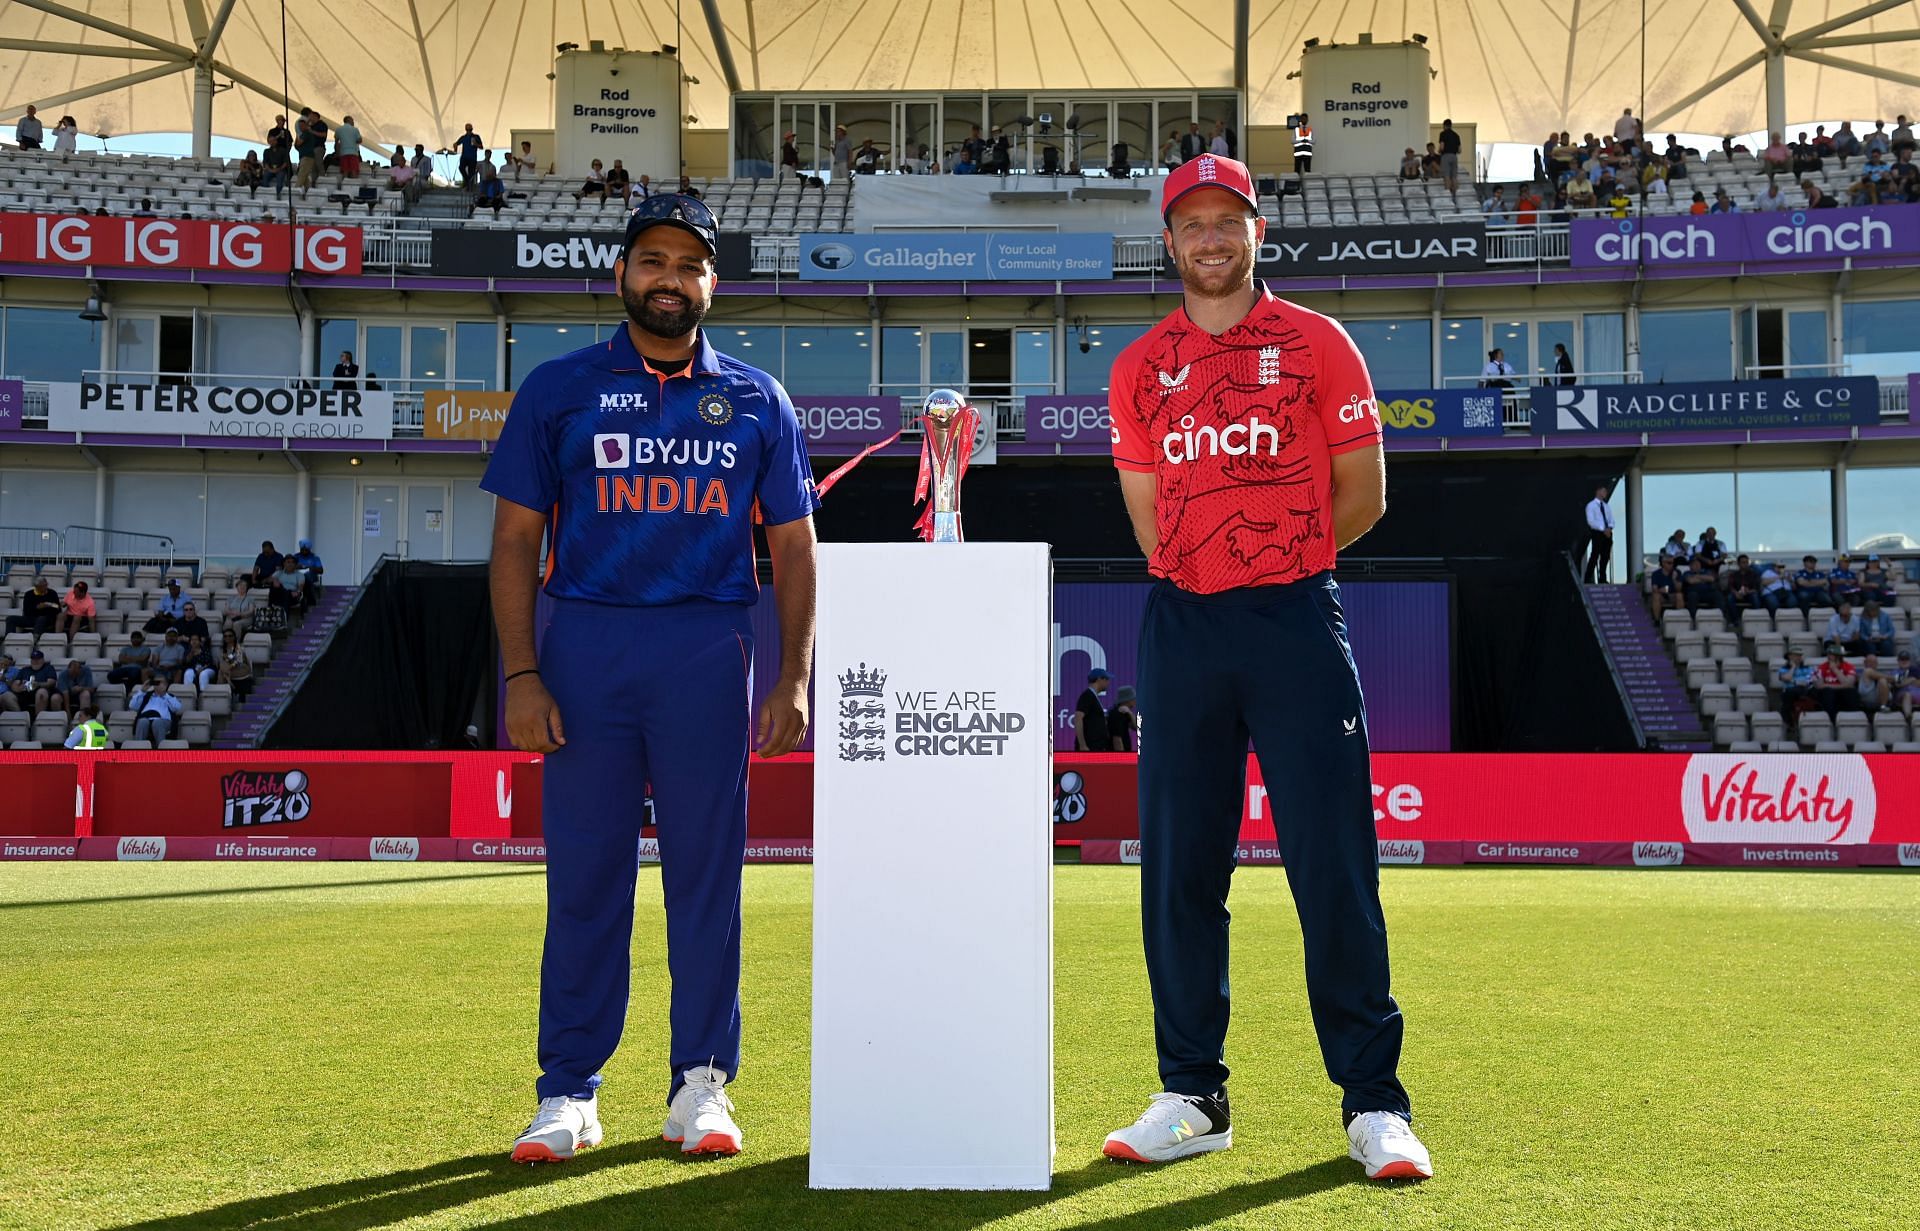 Jos Buttler (R) won the toss and decided to bowl first at Edgbaston (Image Courtesy: Getty)